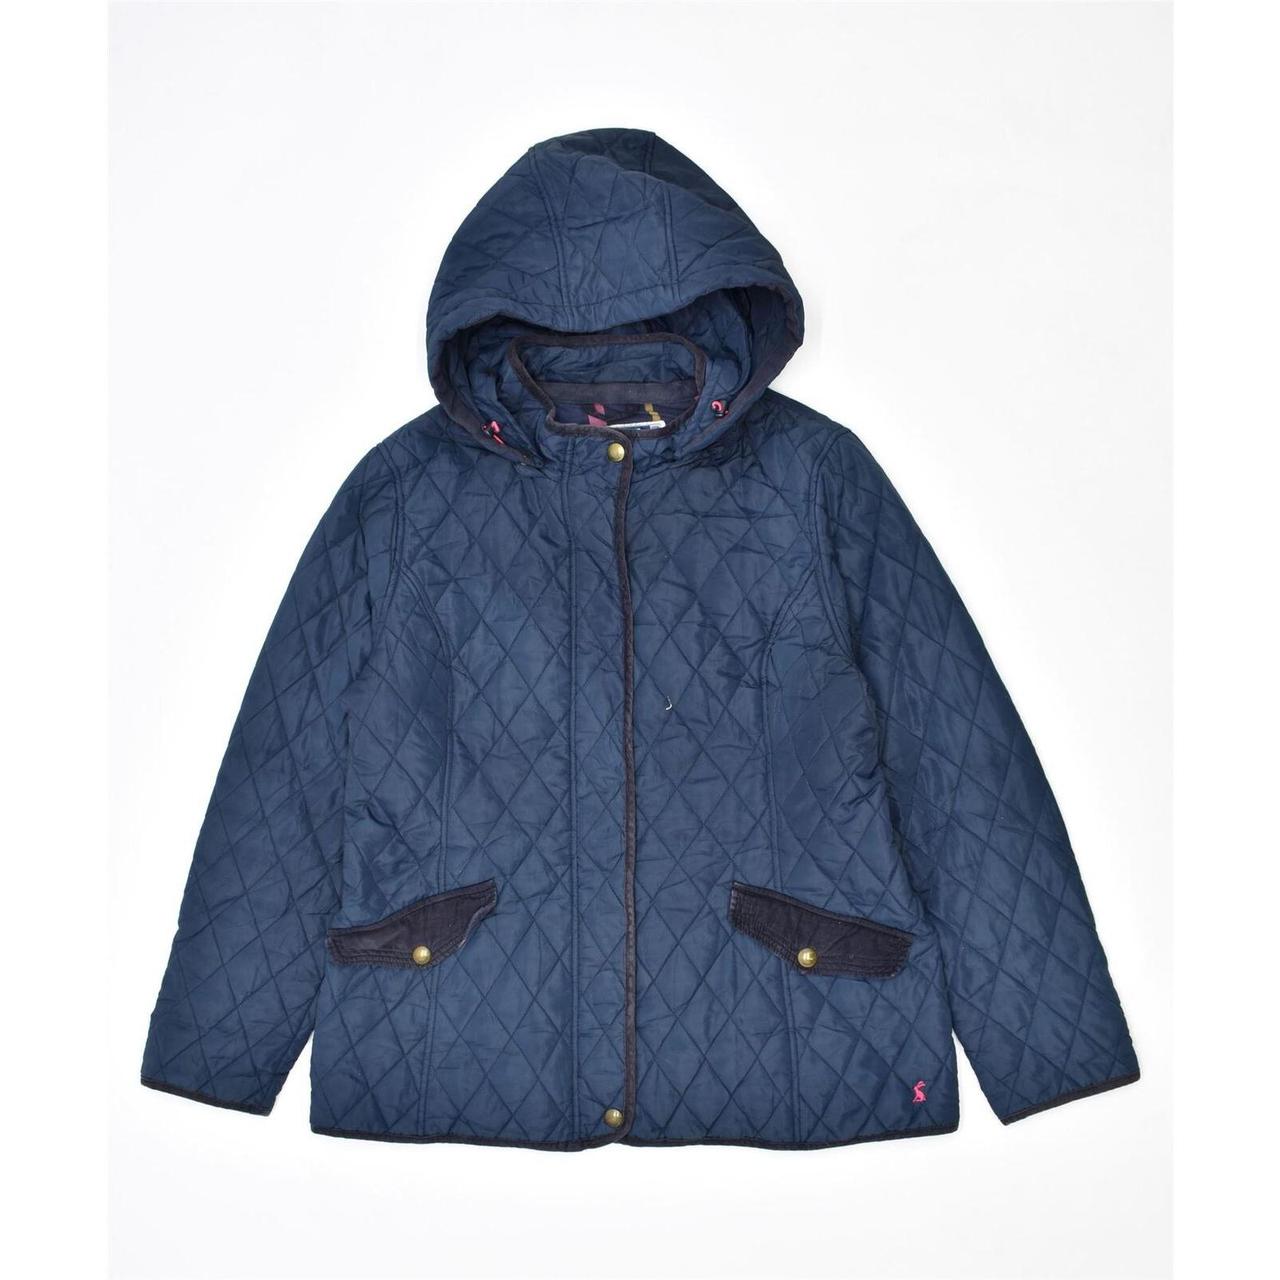 Joules Women's Navy and Blue